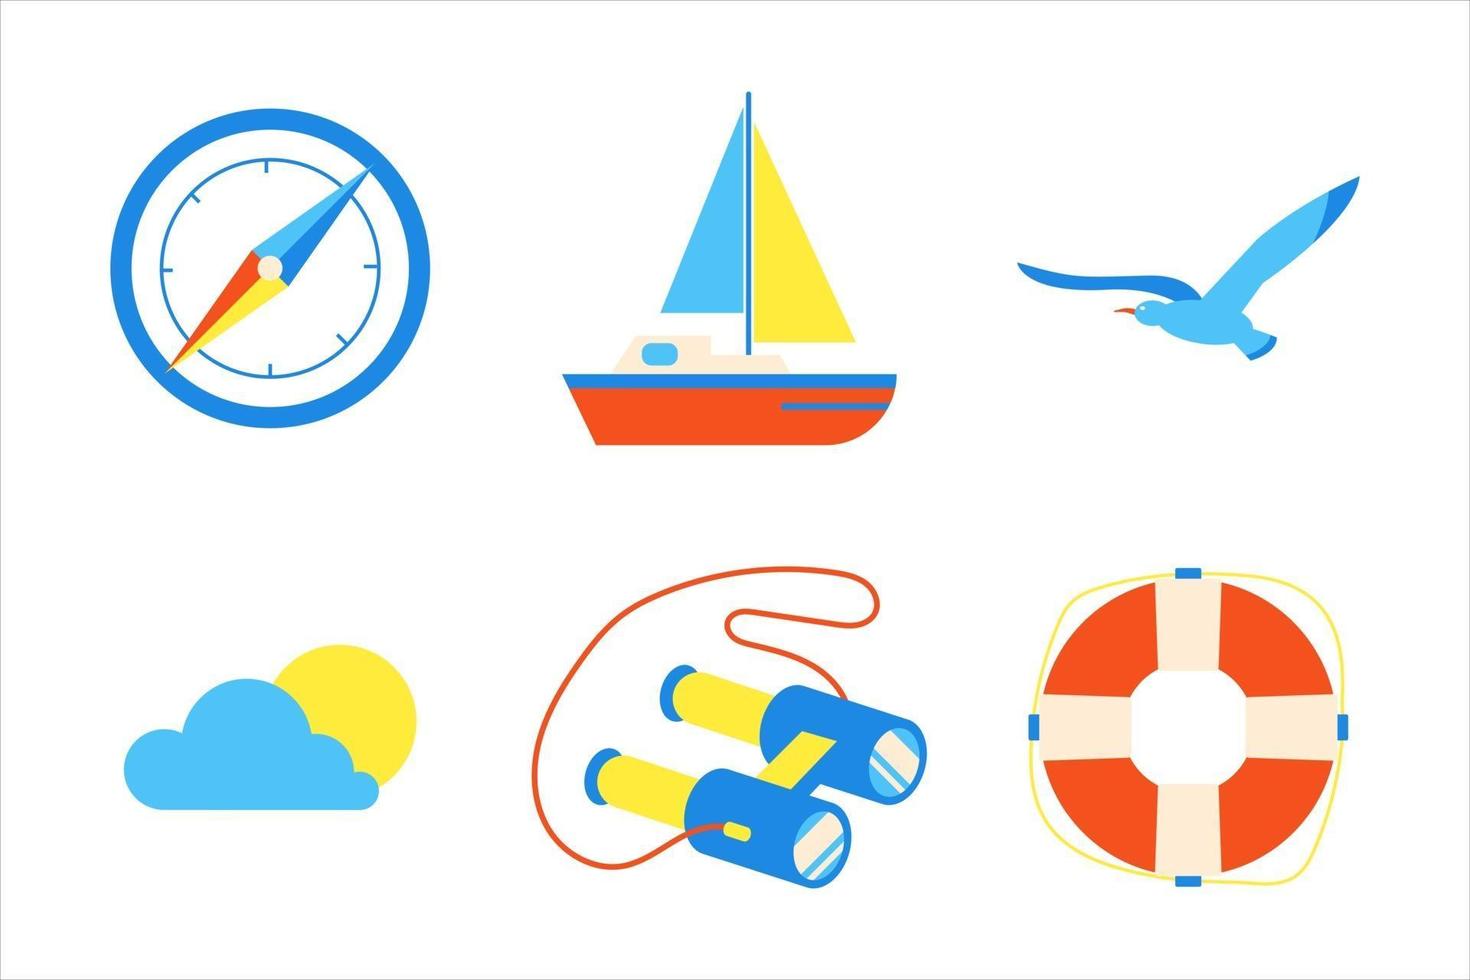 Holiday vacation beach elements flat style design set. Compass, sailboat, seagull, sun, cloud, binoculars, life buoy signs icons - symbols of season exotic vacations isolated on white background. vector